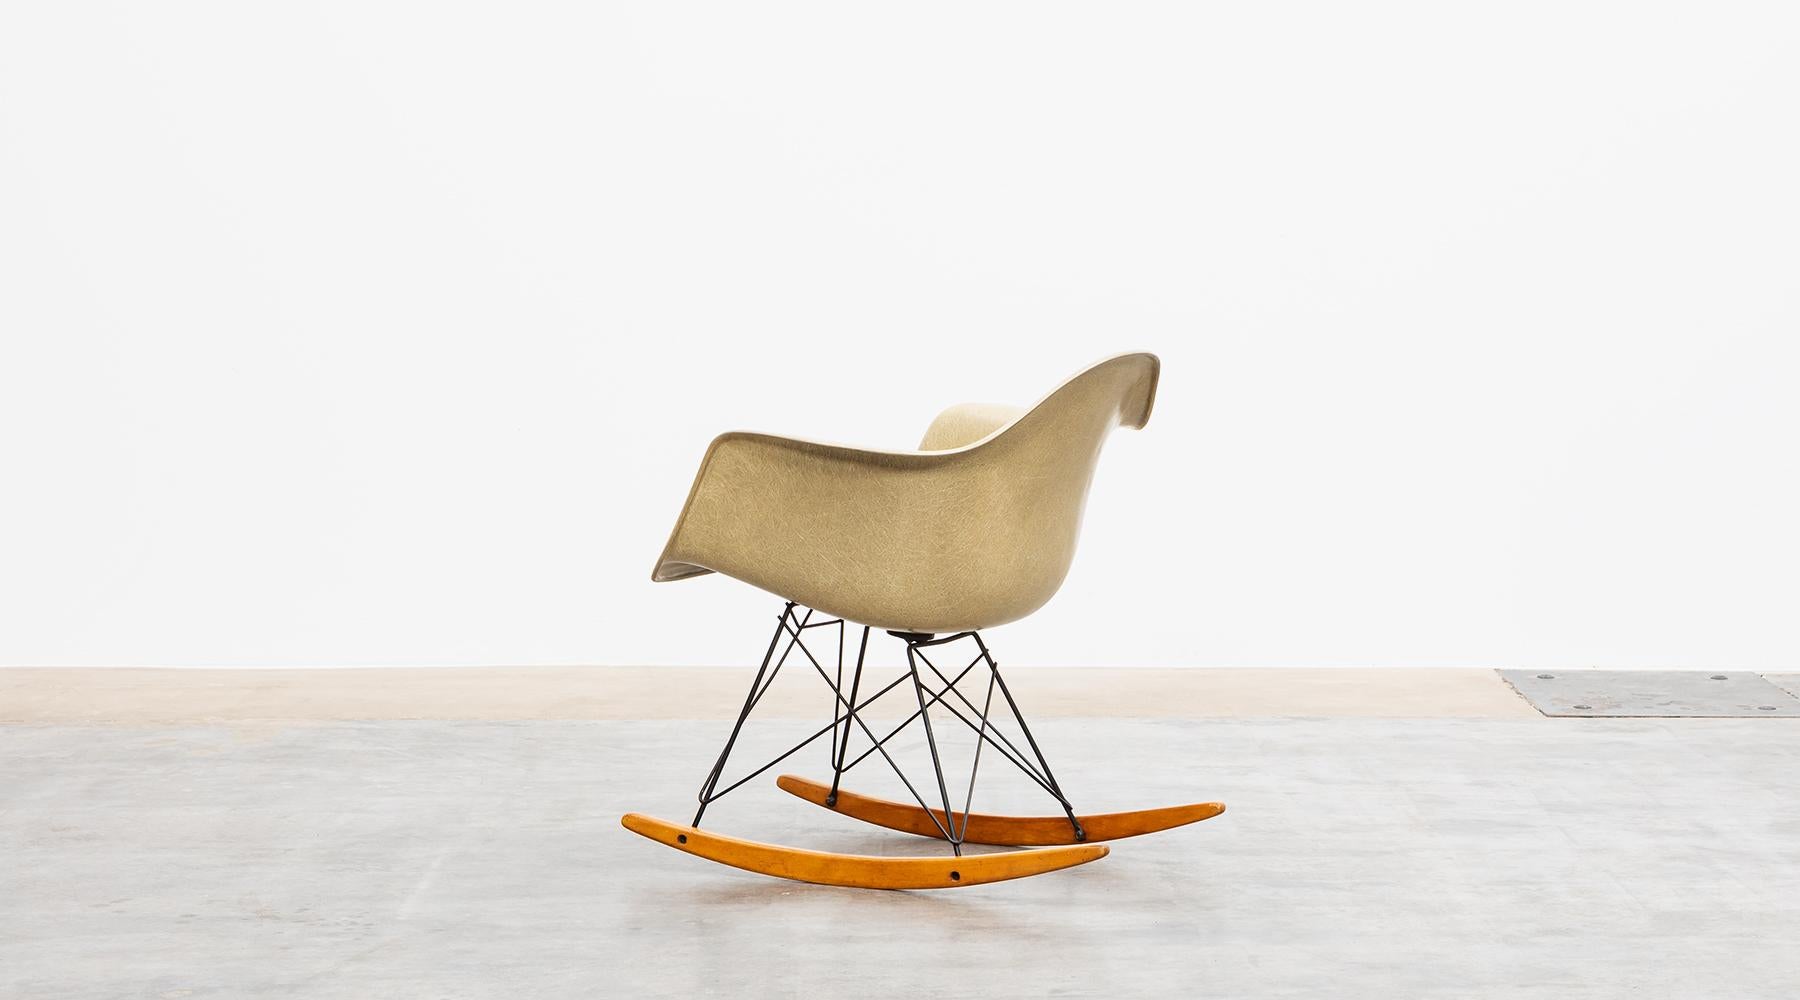 1940s Parchment Color Fiberglass Shell RAR Rocking Chair by Charles & Ray Eames In Good Condition For Sale In Frankfurt, Hessen, DE